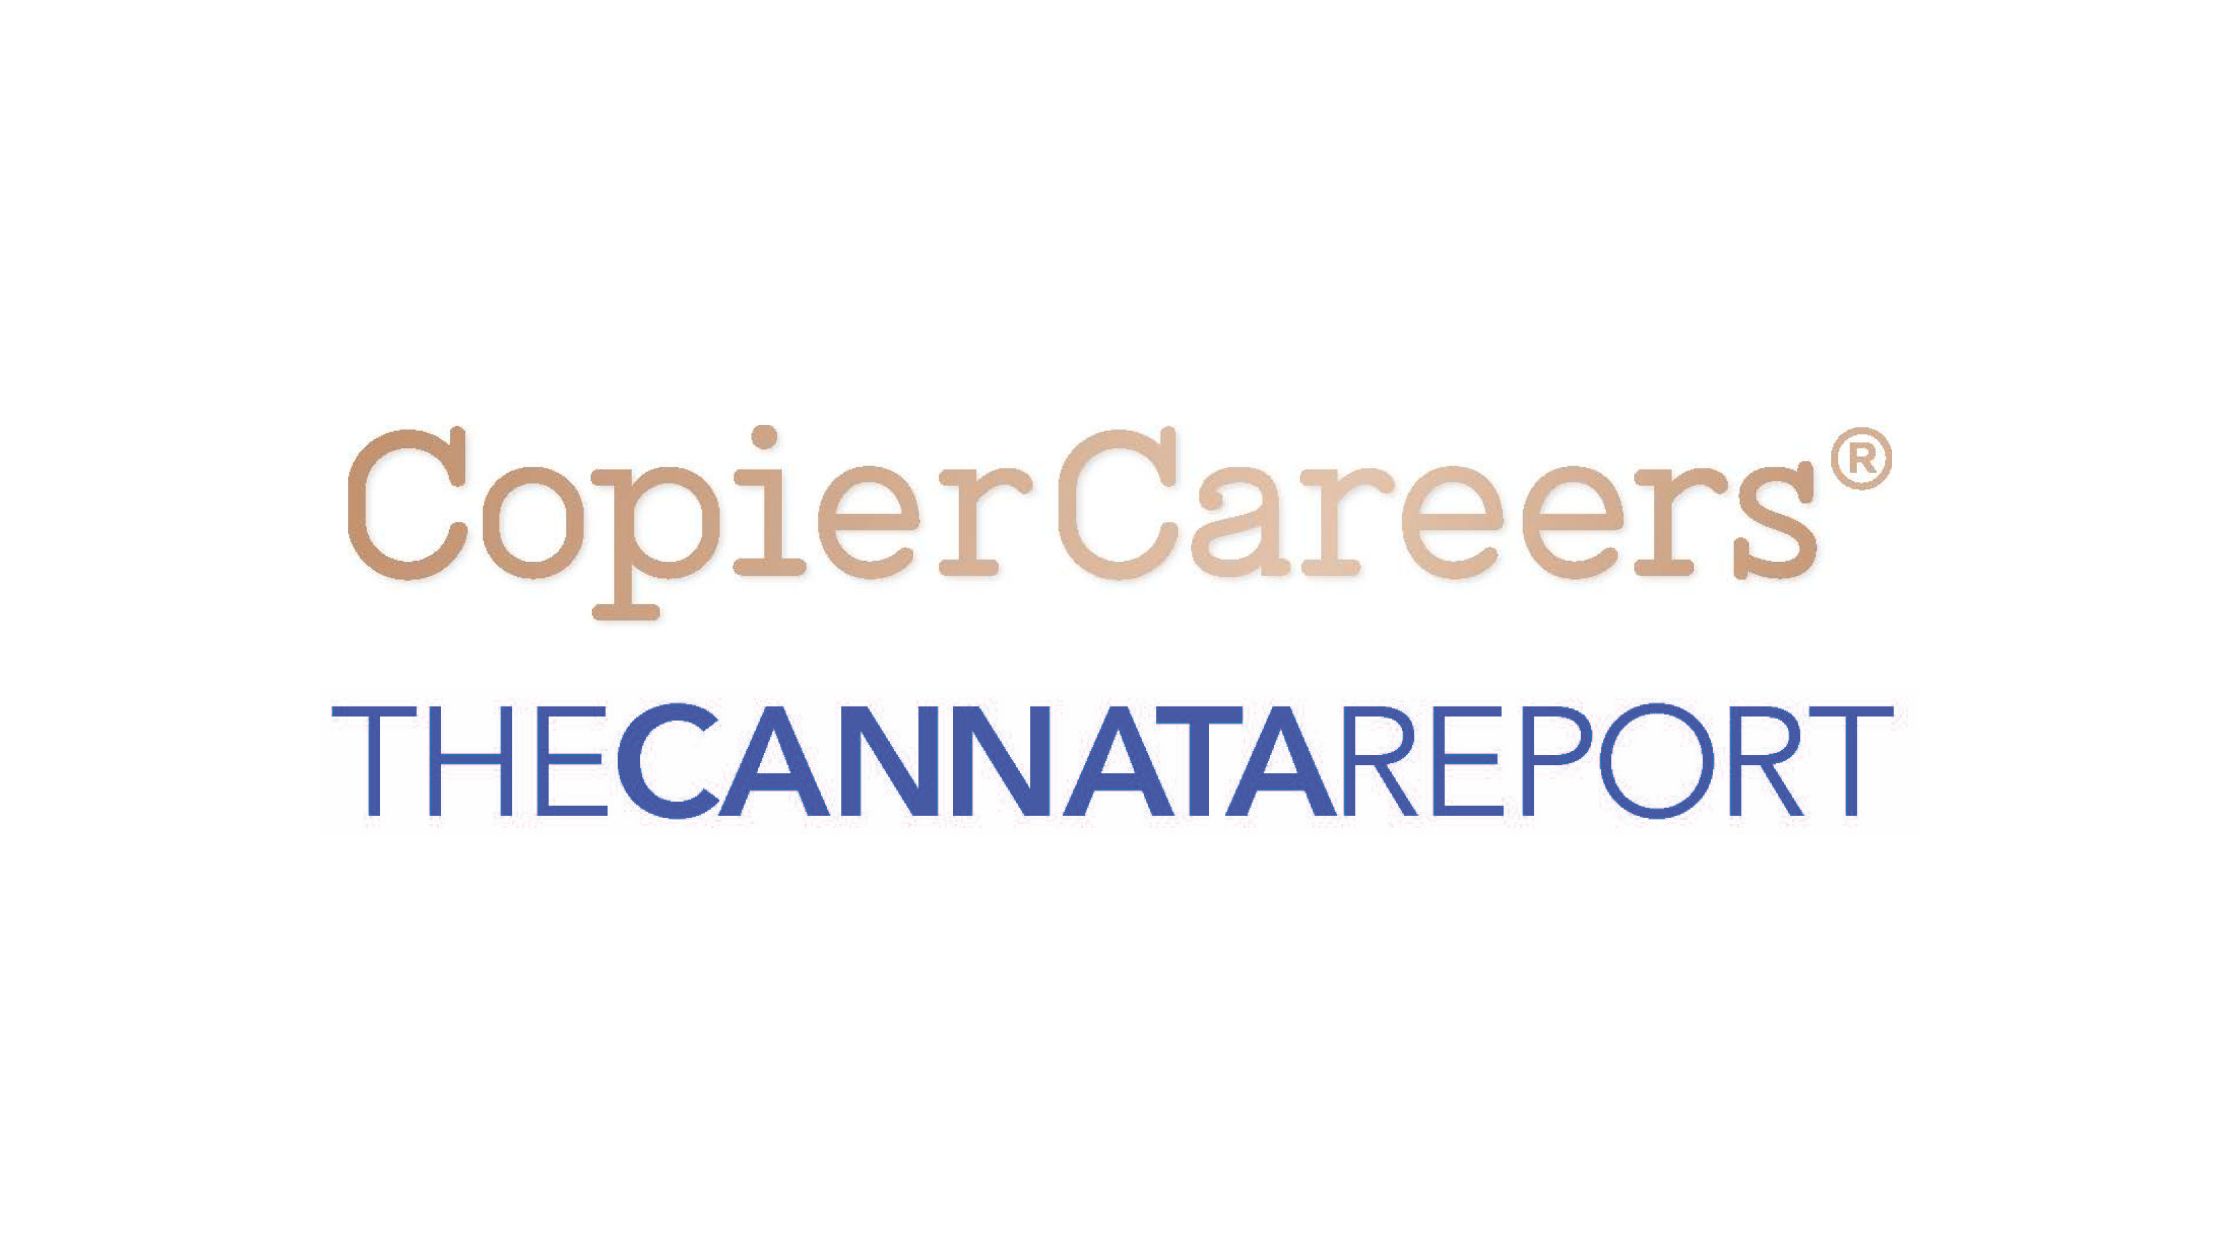 The Cannata Report* and Copier Careers** Partner to Address Recruitment, Hiring, and Retention in Office Technology Industry